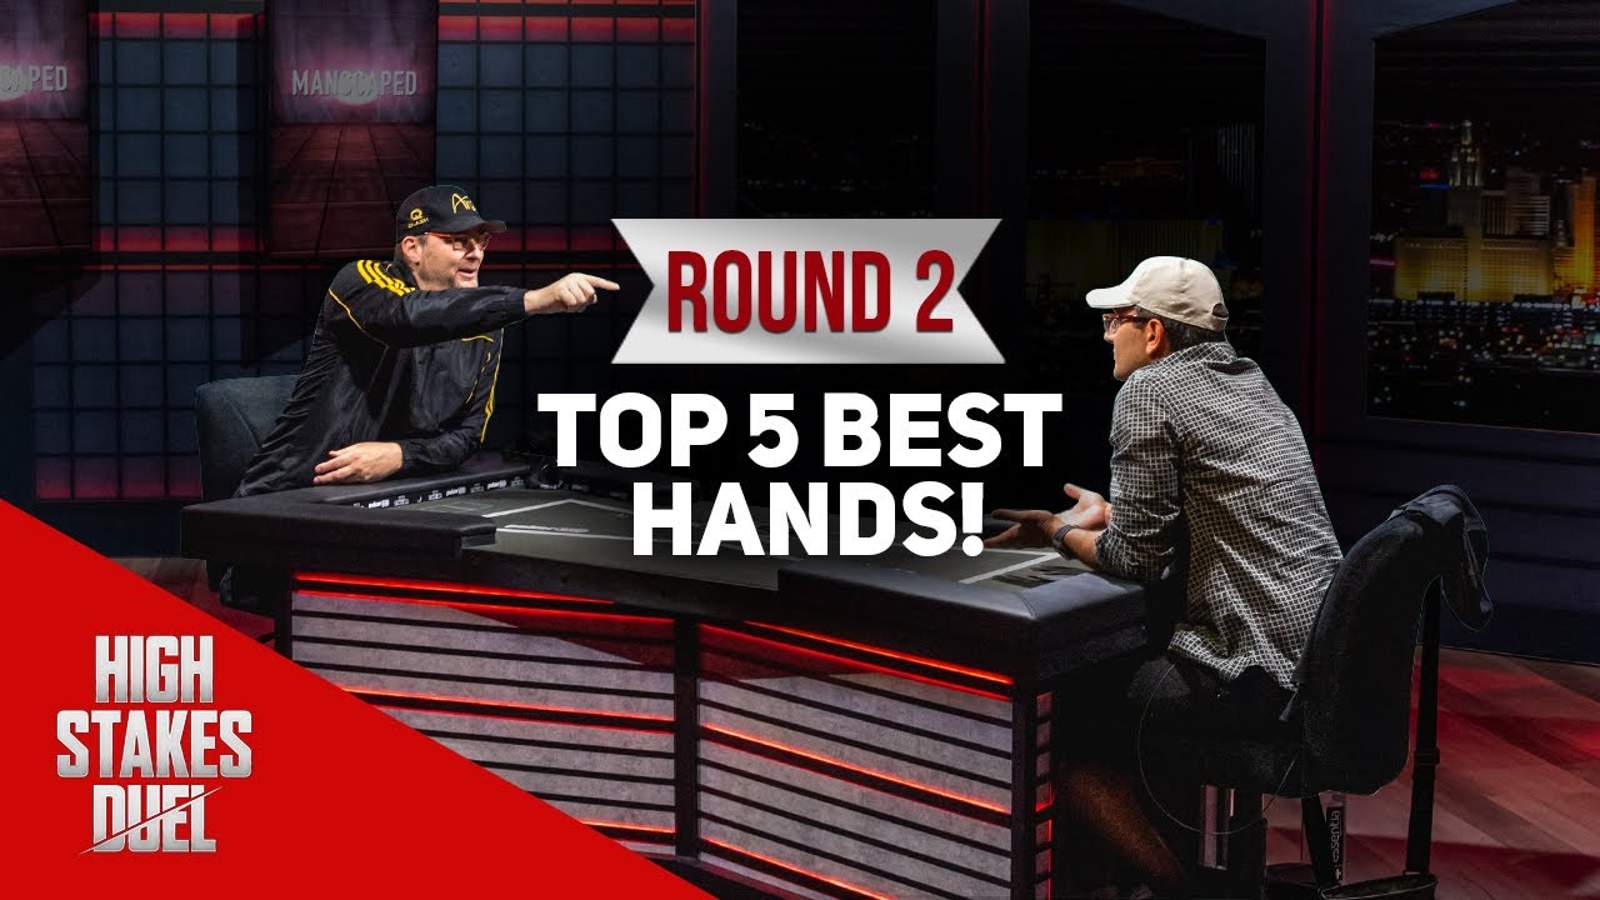 Watch the Best High Stakes Duel Round 2 Hands!